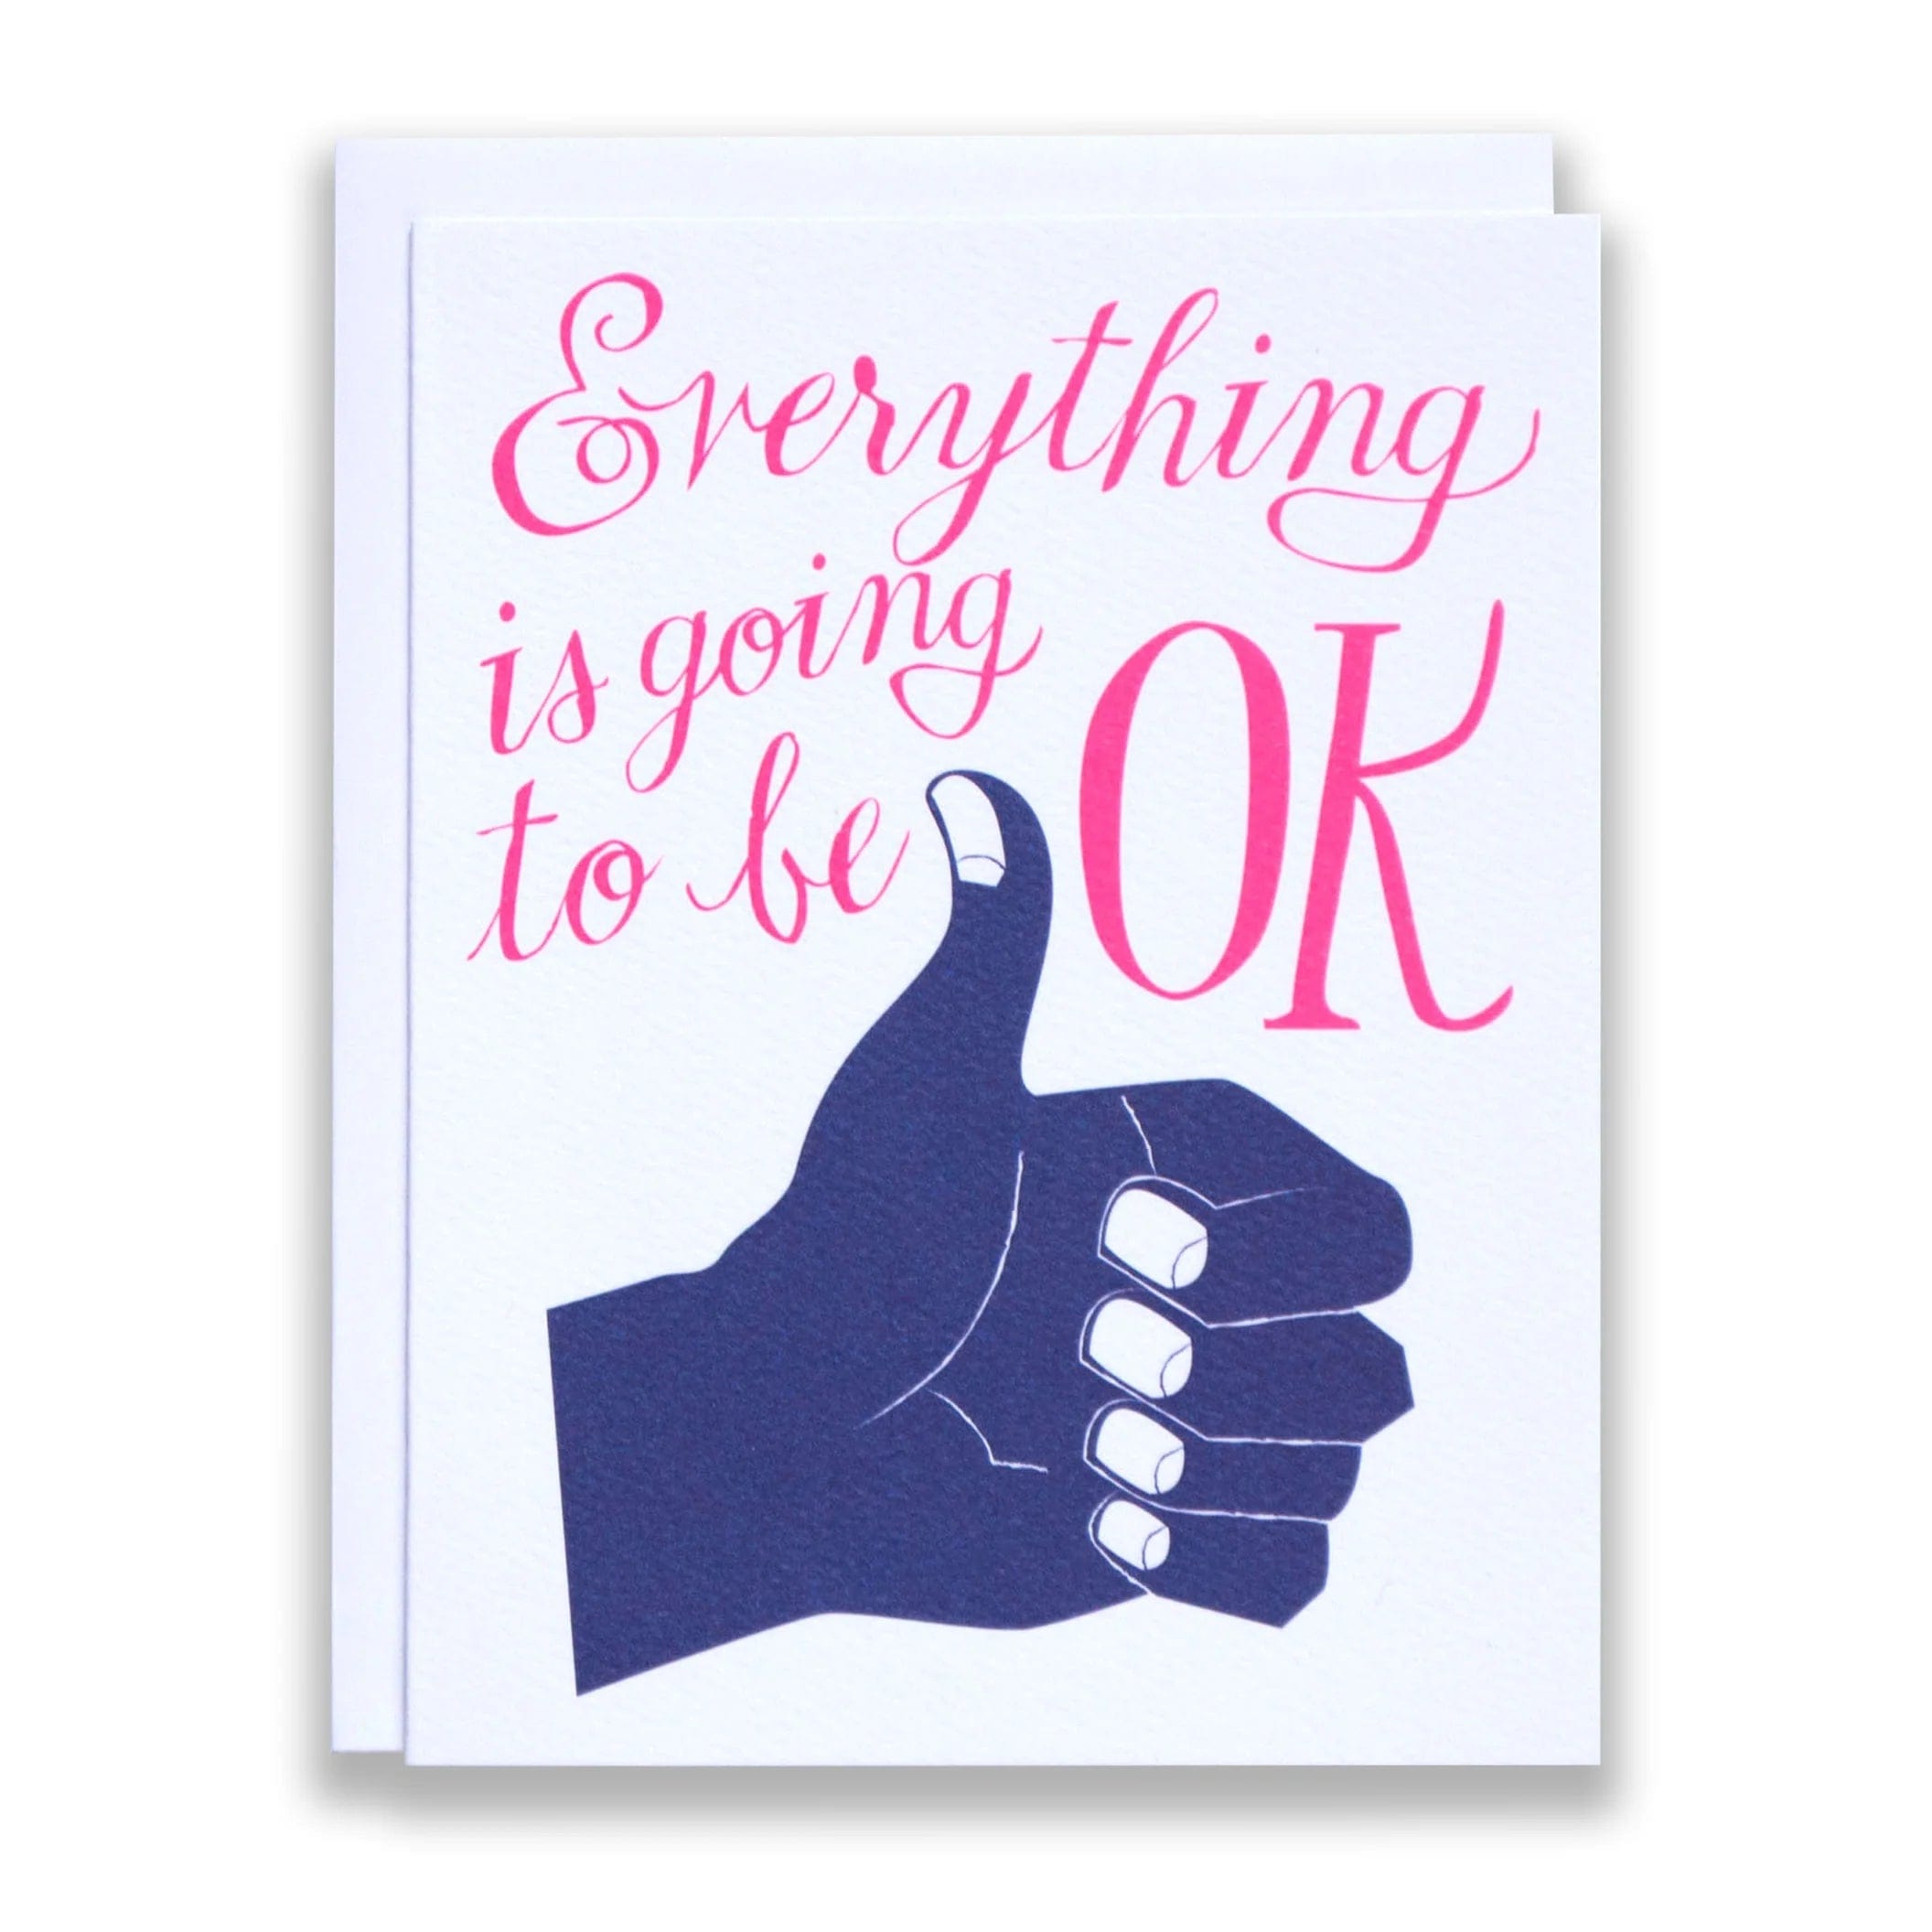 Banquet Workshop Gift Cards Everything is going to be ok Card sunja link - canada